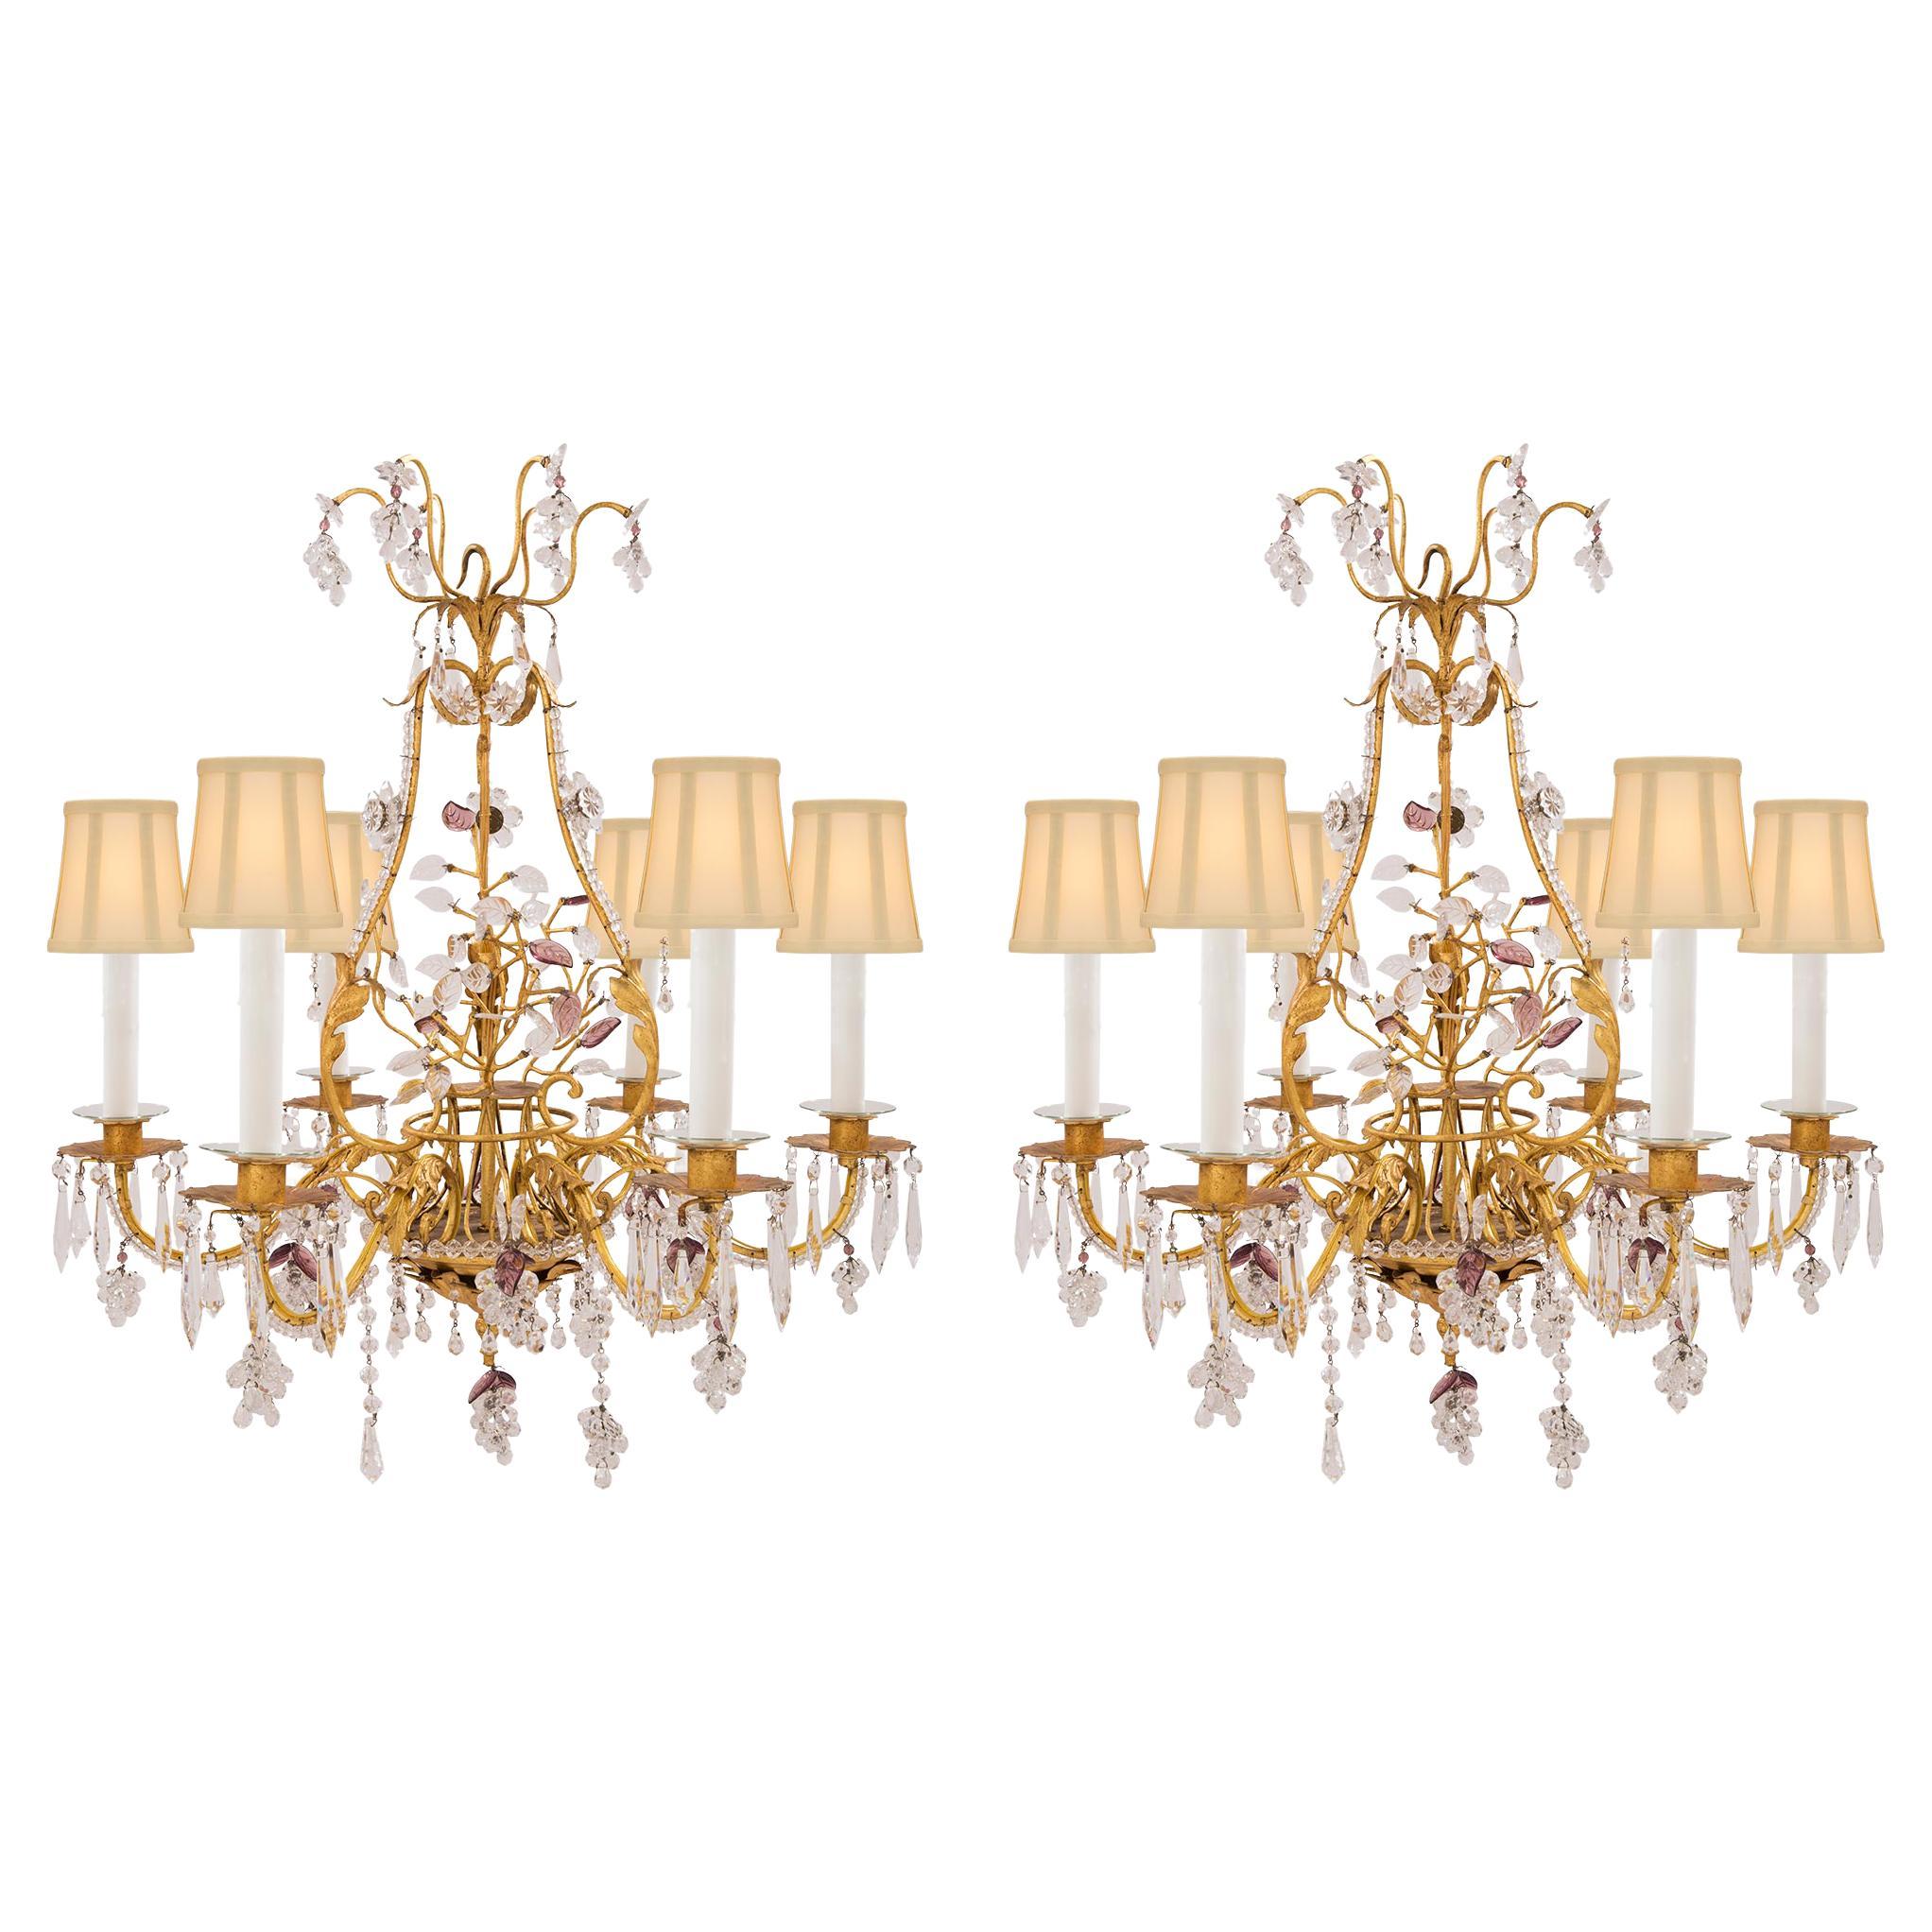 Pair of French 19th Century Louis XV St. Chandeliers Attributed to Maison Baguès For Sale